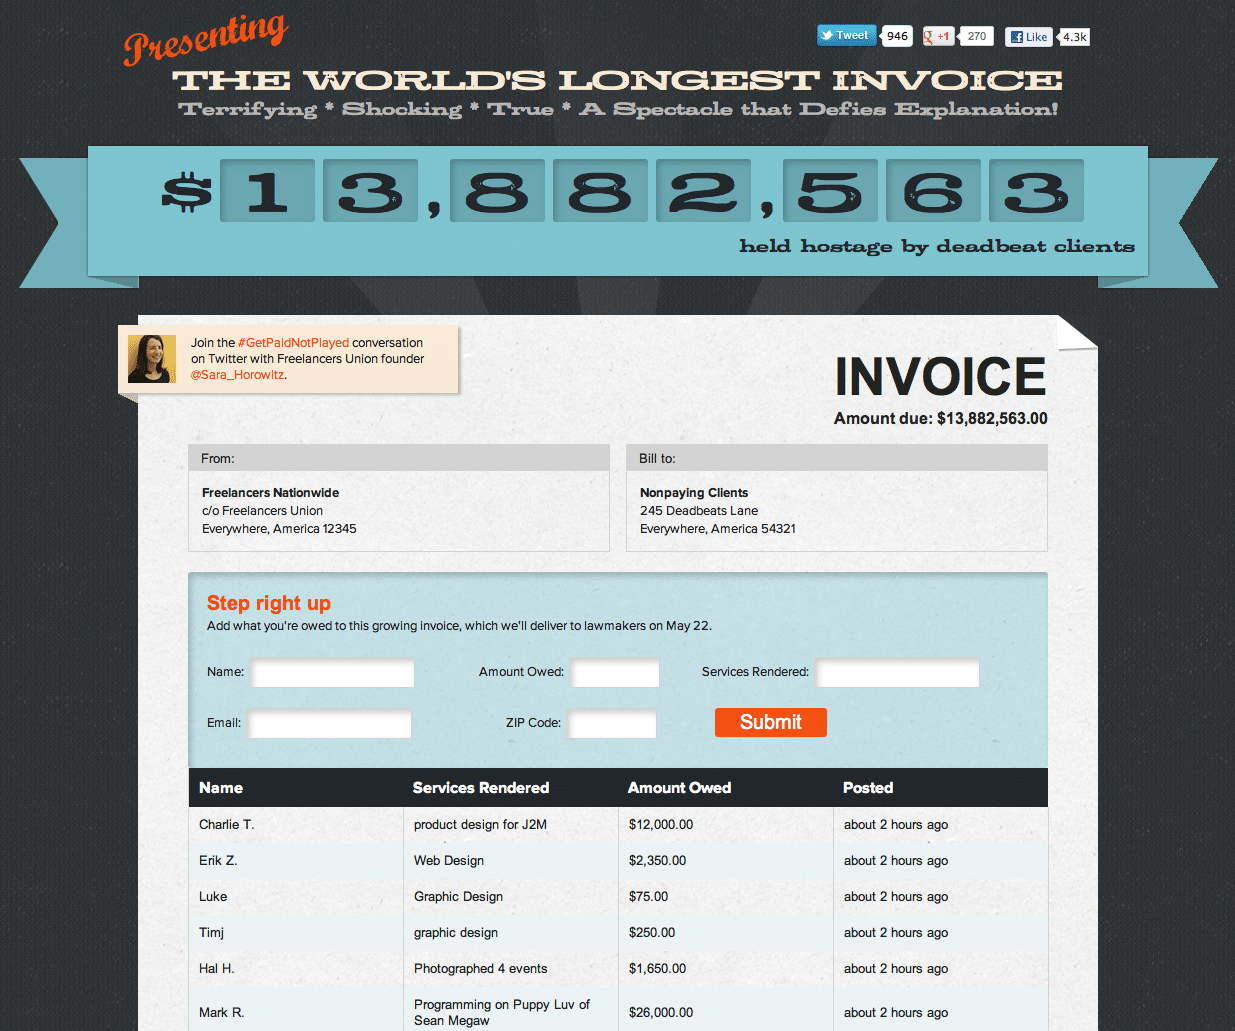 What the World's Longest Invoice Won't Teach You